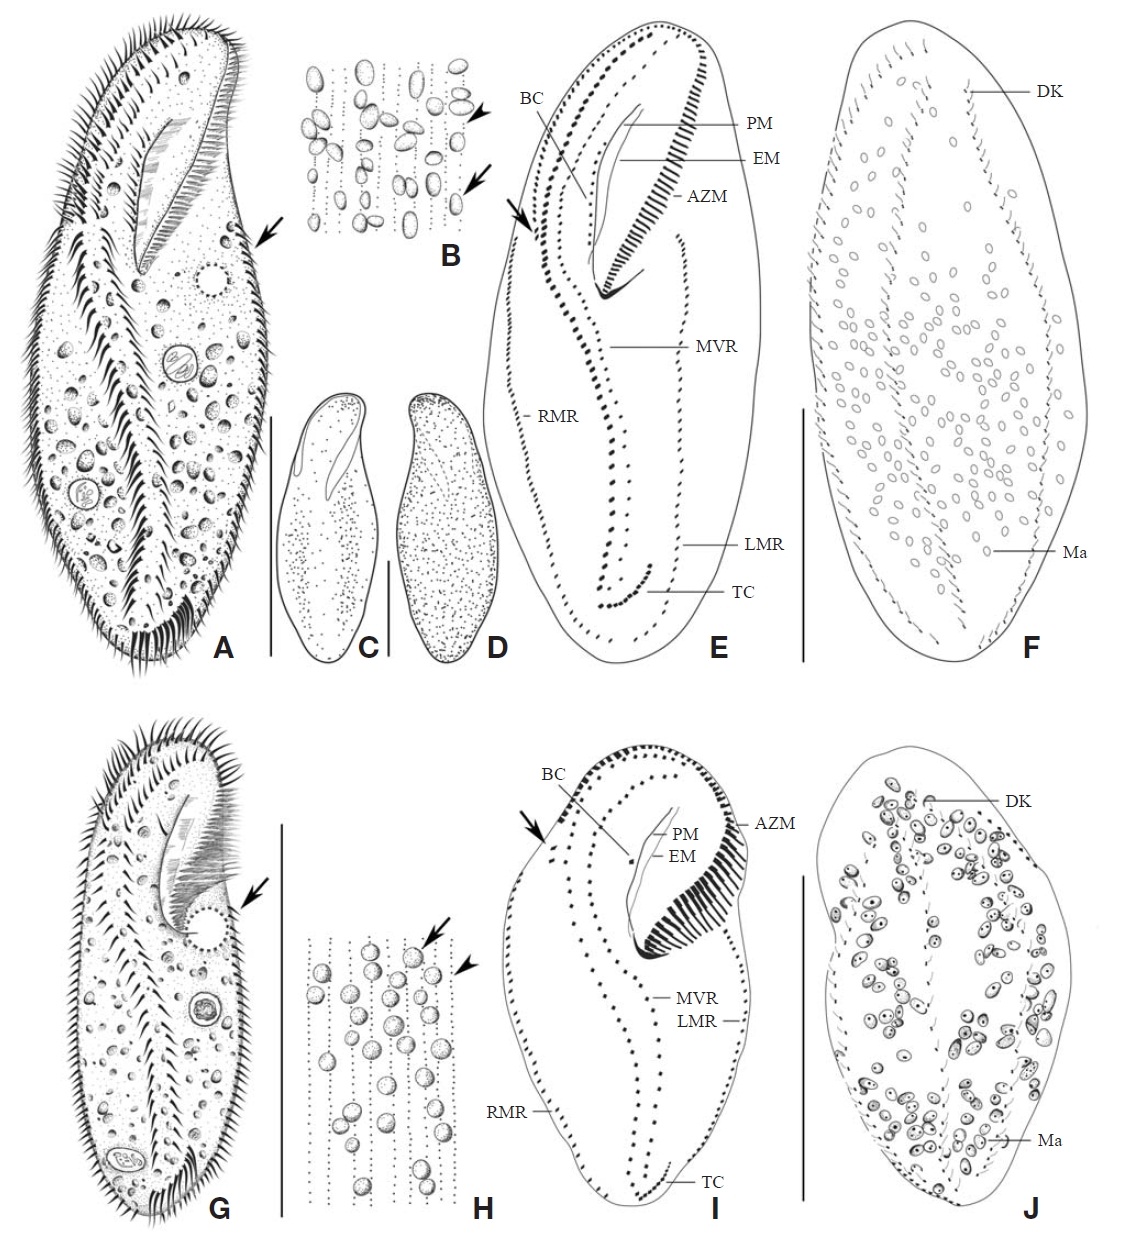 Morphology and infraciliature of Apokeronopsis bergeri and A. ovalis from live (A-D G H) and after protargol impregnation(E F I J). A-F Apokeronopsis bergeri: A Ventral view of live arrow indicates the contractile vacuole; B Two types of densely distributed granules arrow and arrowhead show the granules respectively; larger granules scattered throughout the body ventral(C) and dorsal (D) views; E F Infraciliature of ventral (E) and dorsal (F) sides arrow in (E) to show frontoterminal cirri; G-J Apokeronopsis ovalis: G Ventral view of live arrow indicates the contractile vacuole; H Densely distributed granules arrow and arrowhead show the two types of granules respectively; I J Infraciliature of ventral (I) and dorsal (J) sides arrow in (I) to show frontoterminal cirri. AZM adoral zone of membranelles; BC buccal cirri; DK dorsal kineties; EM endoral membrane; LMR left marginal row; Mamacronuclei; MVR midventral row; PM paroral membrane; RMR right marginal row; TC transverse cirri. Scale bars: 100 μm.